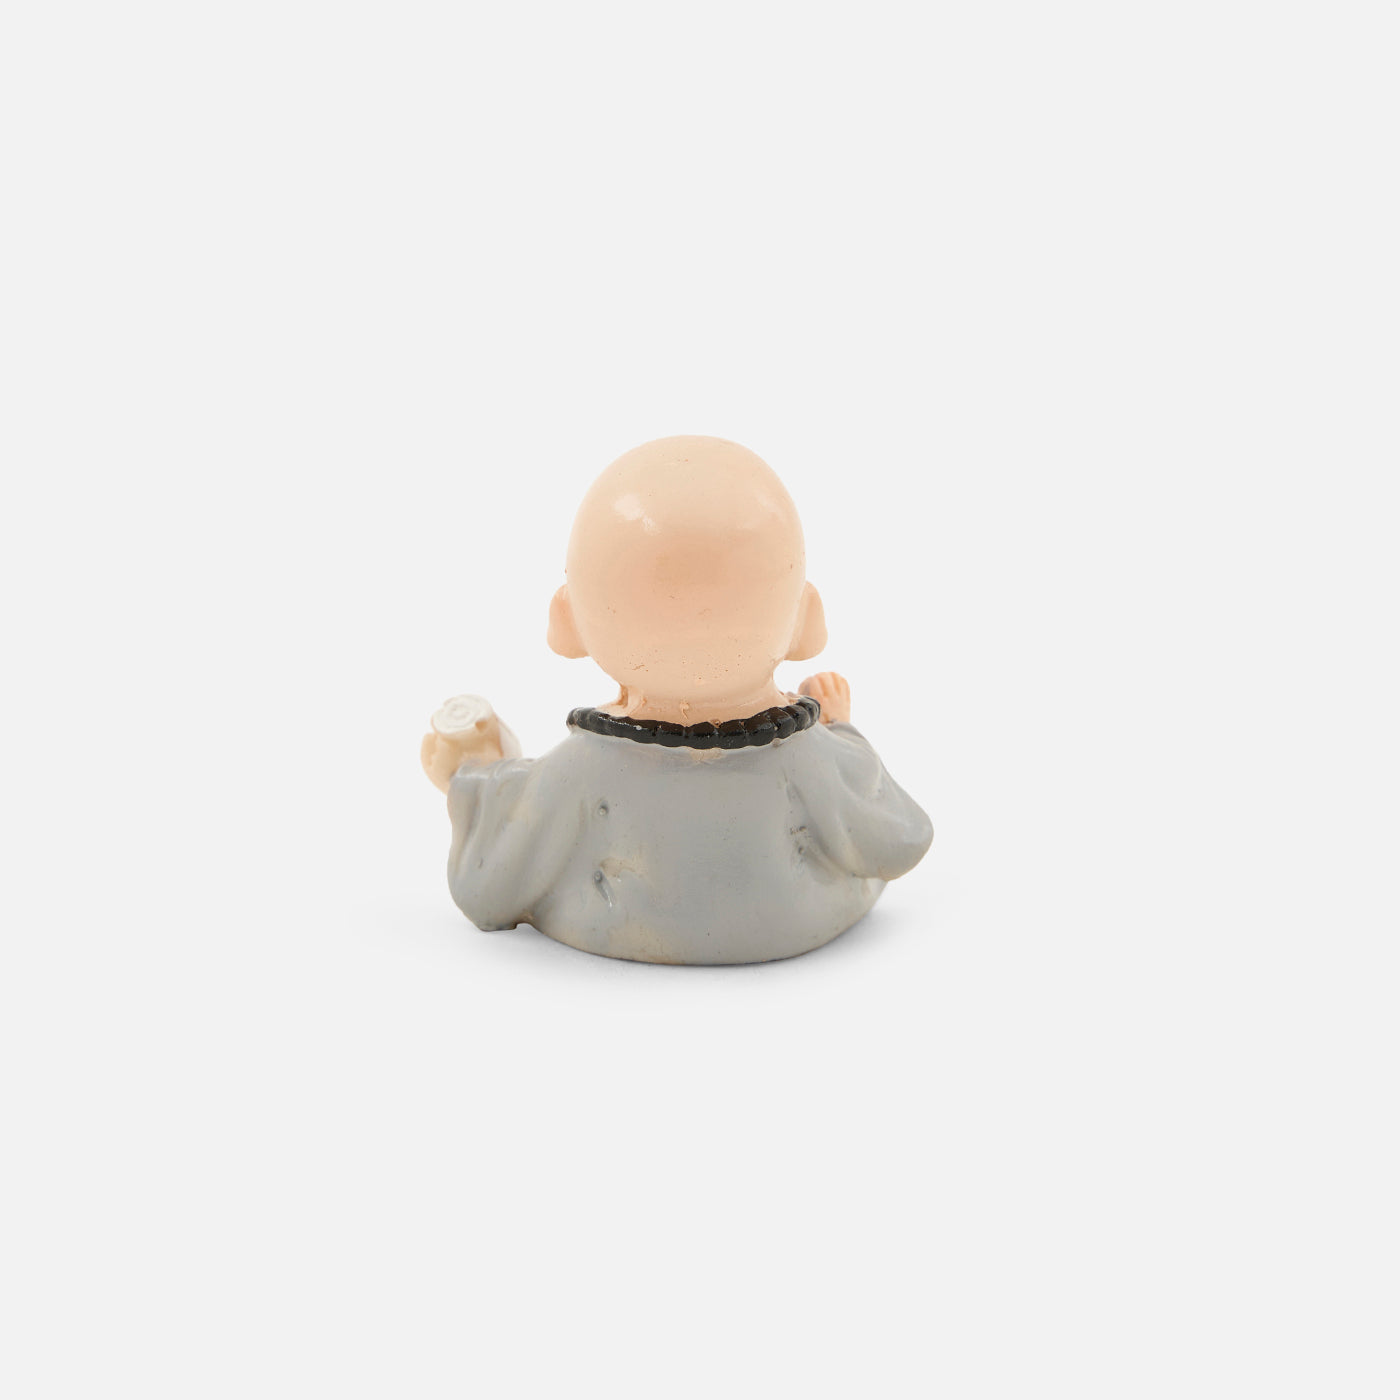 Artistic Resin Buddha Monk Statue Set - Perfect for Home Decor, Car Dashboard, and Thoughtful Gifting